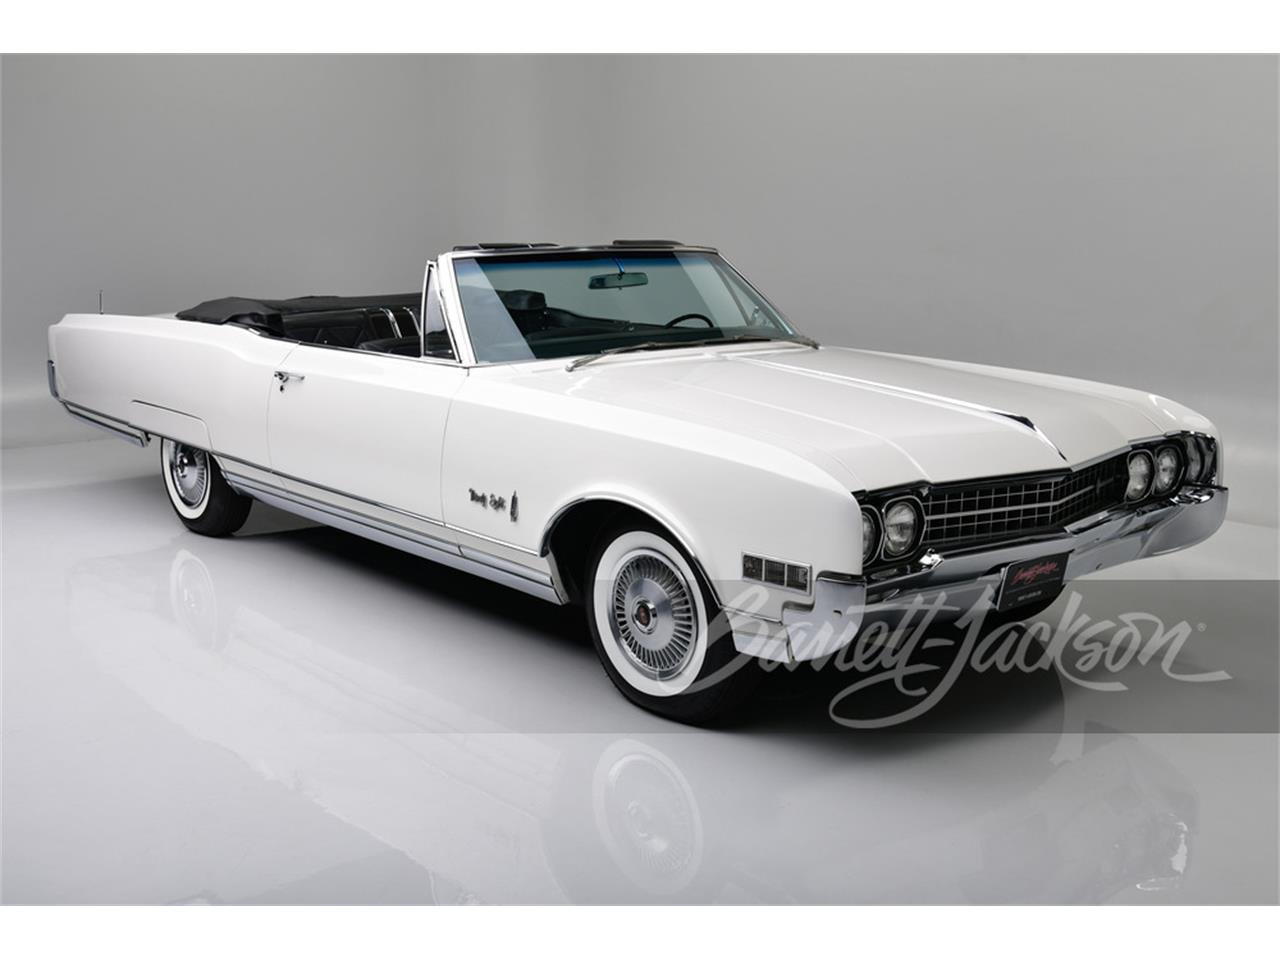 For Sale at Auction: 1966 Oldsmobile 98 in Scottsdale, Arizona for sale in Scottsdale, AZ